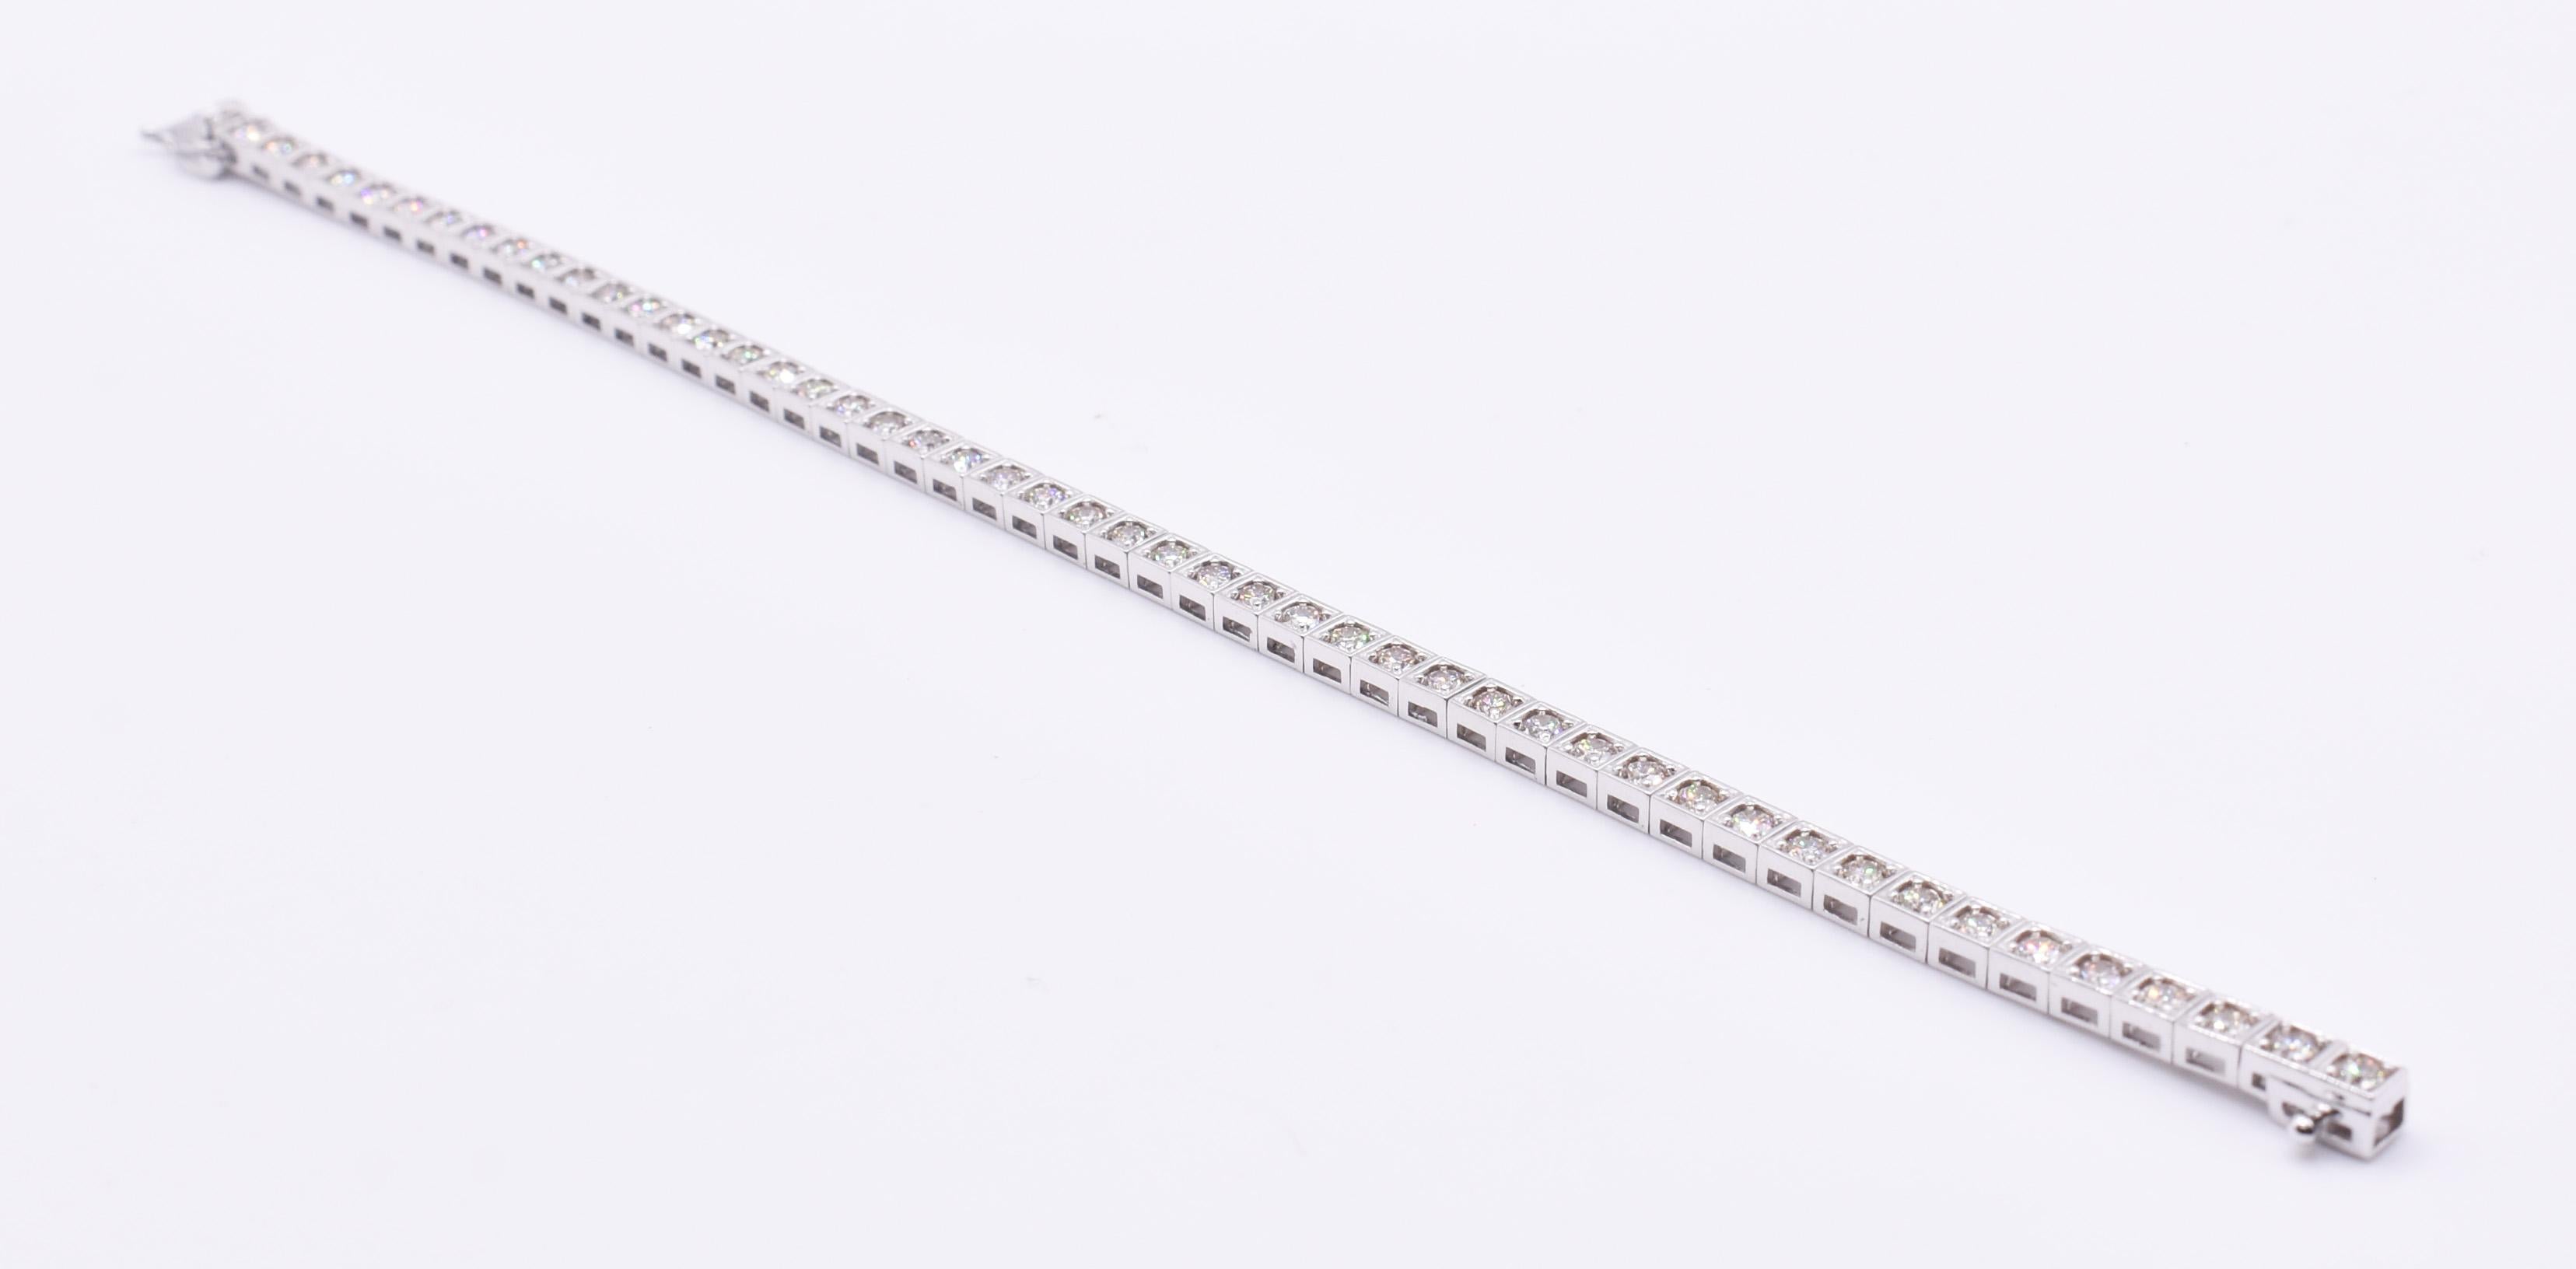 For sale is a fine quality 18k white gold 3.50ct tennisbracelet, featuring 49 round brilliant cut natural diamonds in a box setting. The diamonds rang from H-J in colour and are SI1 clarity.4750 The bracelet is equipped with a slide latch box